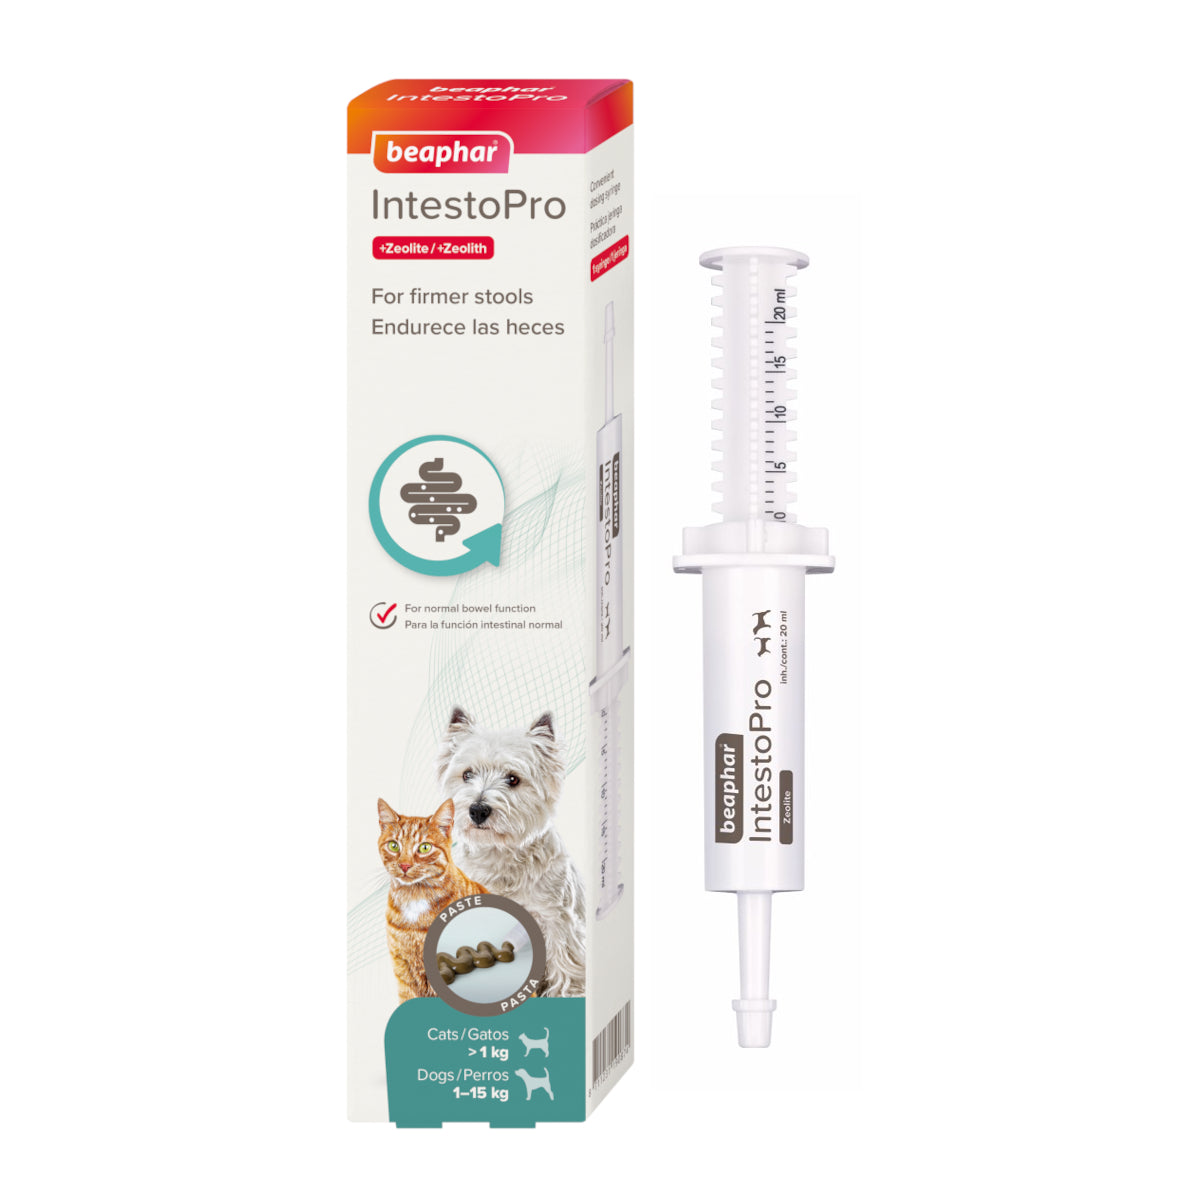 Beaphar IntestoPro Paste 20ml Digestion Relief for Cats & Small Dogs